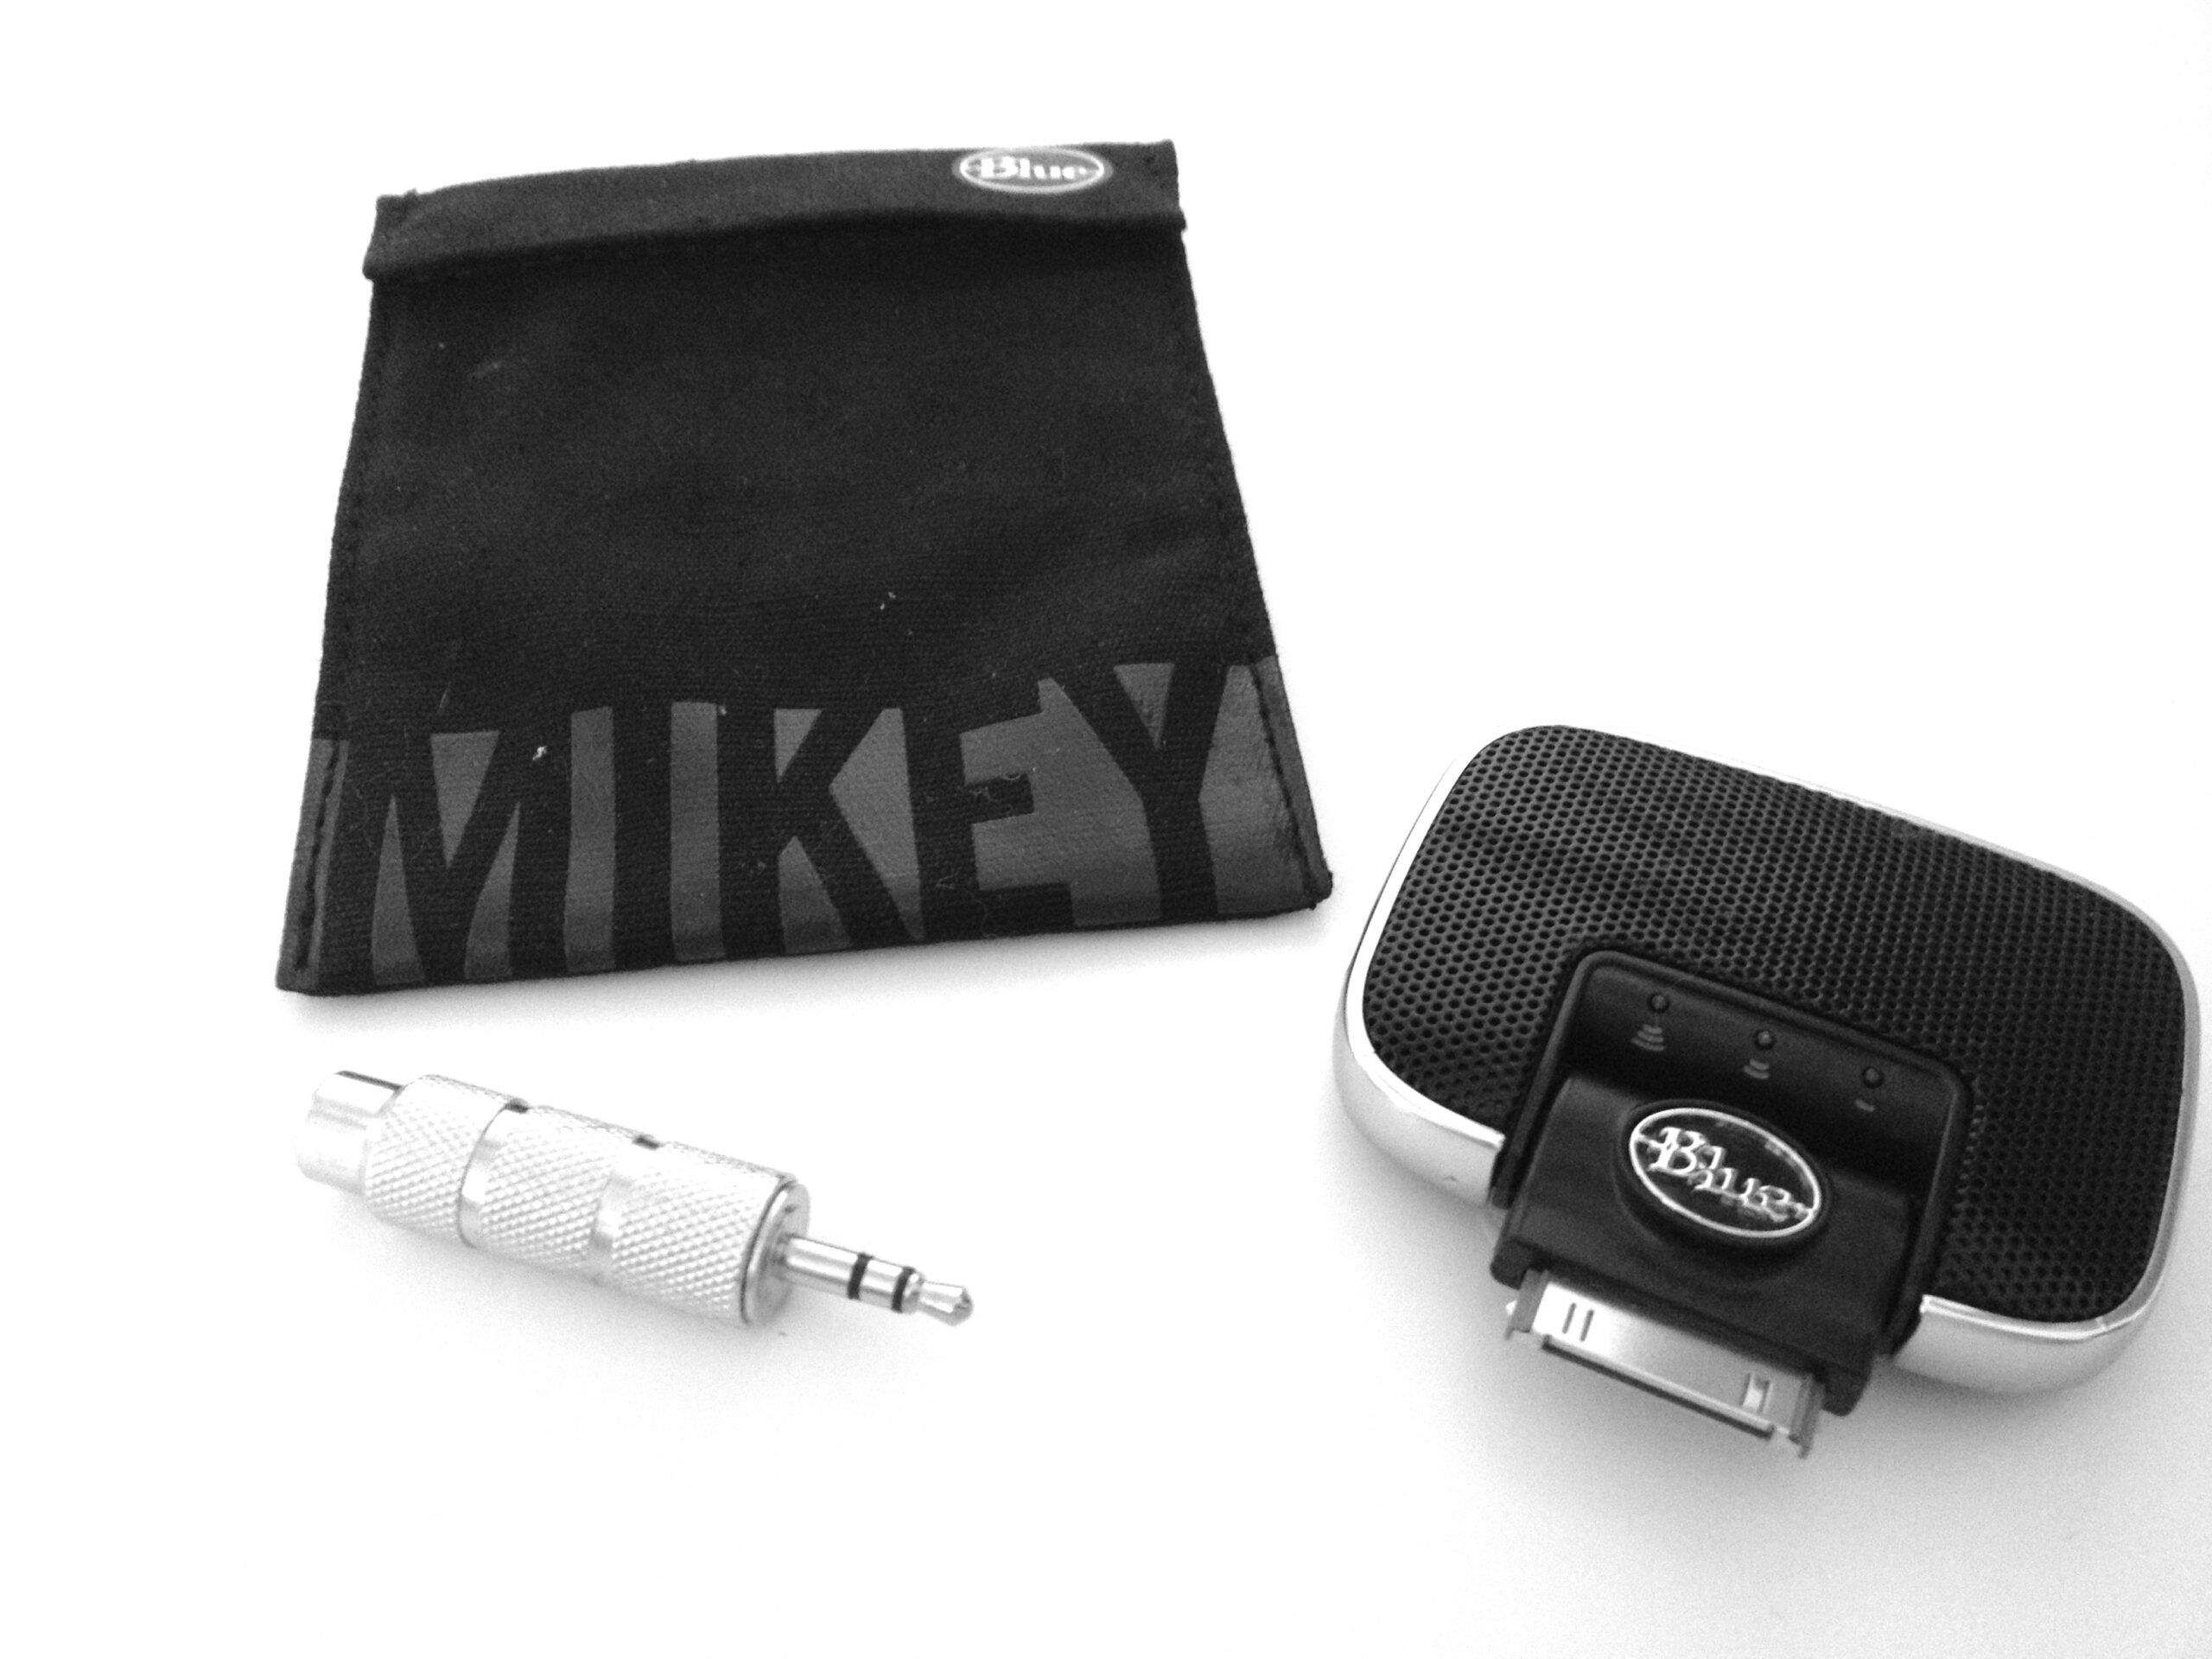 Blue Mikey Portable Speaker Review